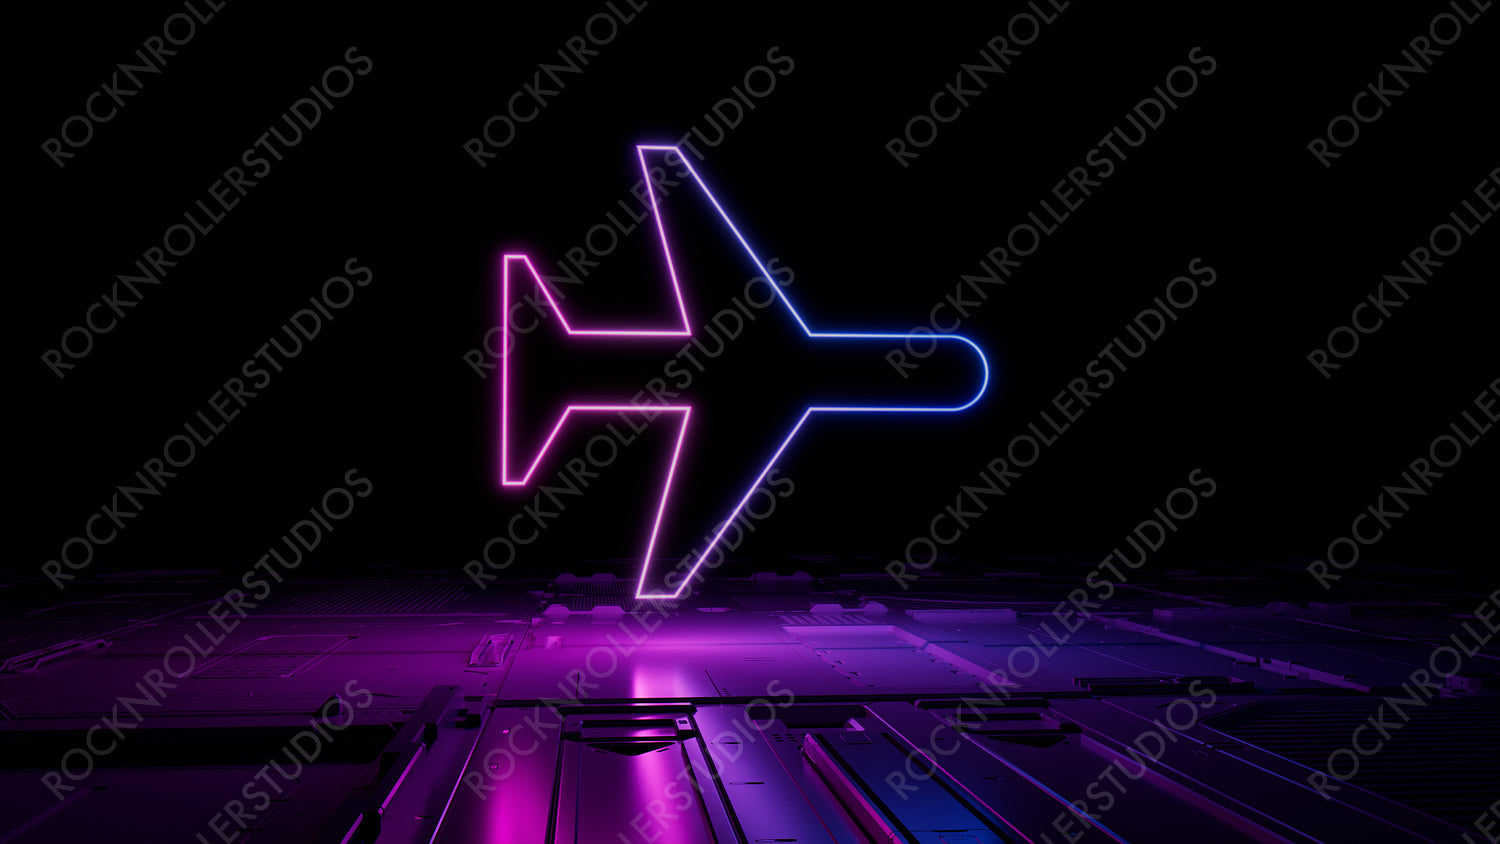 Pink and Blue Flight Technology Concept with airplane symbol as a neon light. Vibrant colored icon, on a black background with high tech floor. 3D Render